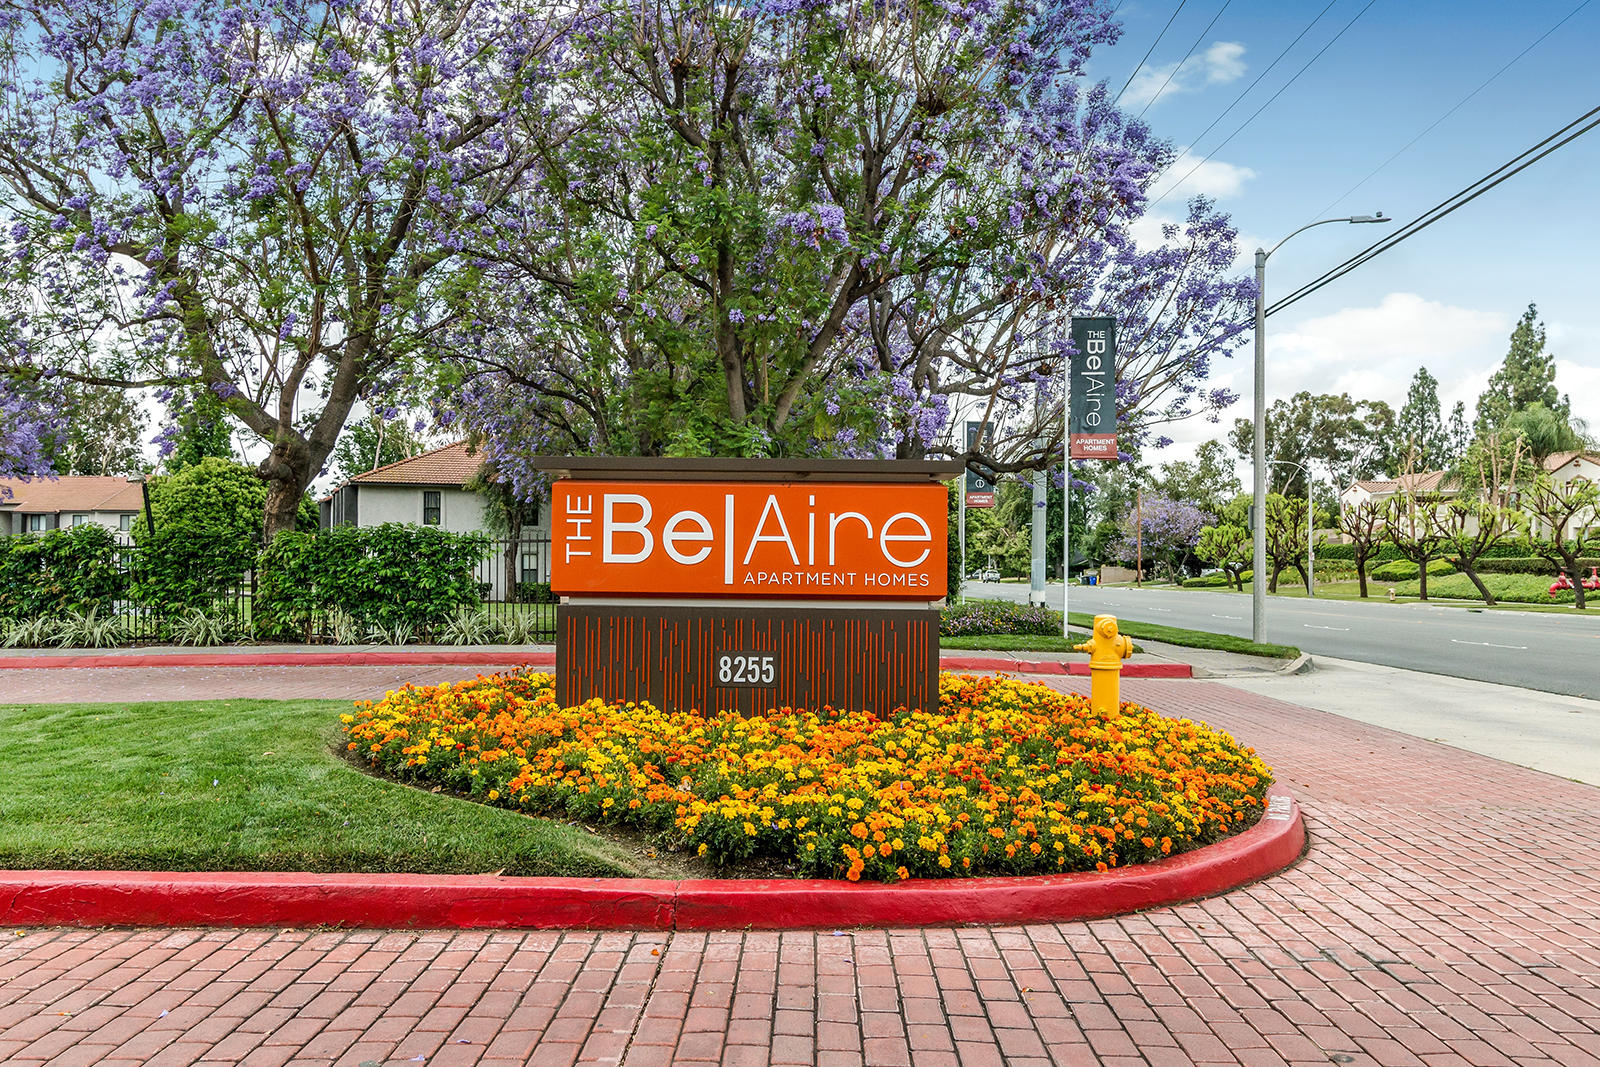 The BelAire Apartment Homes Photo